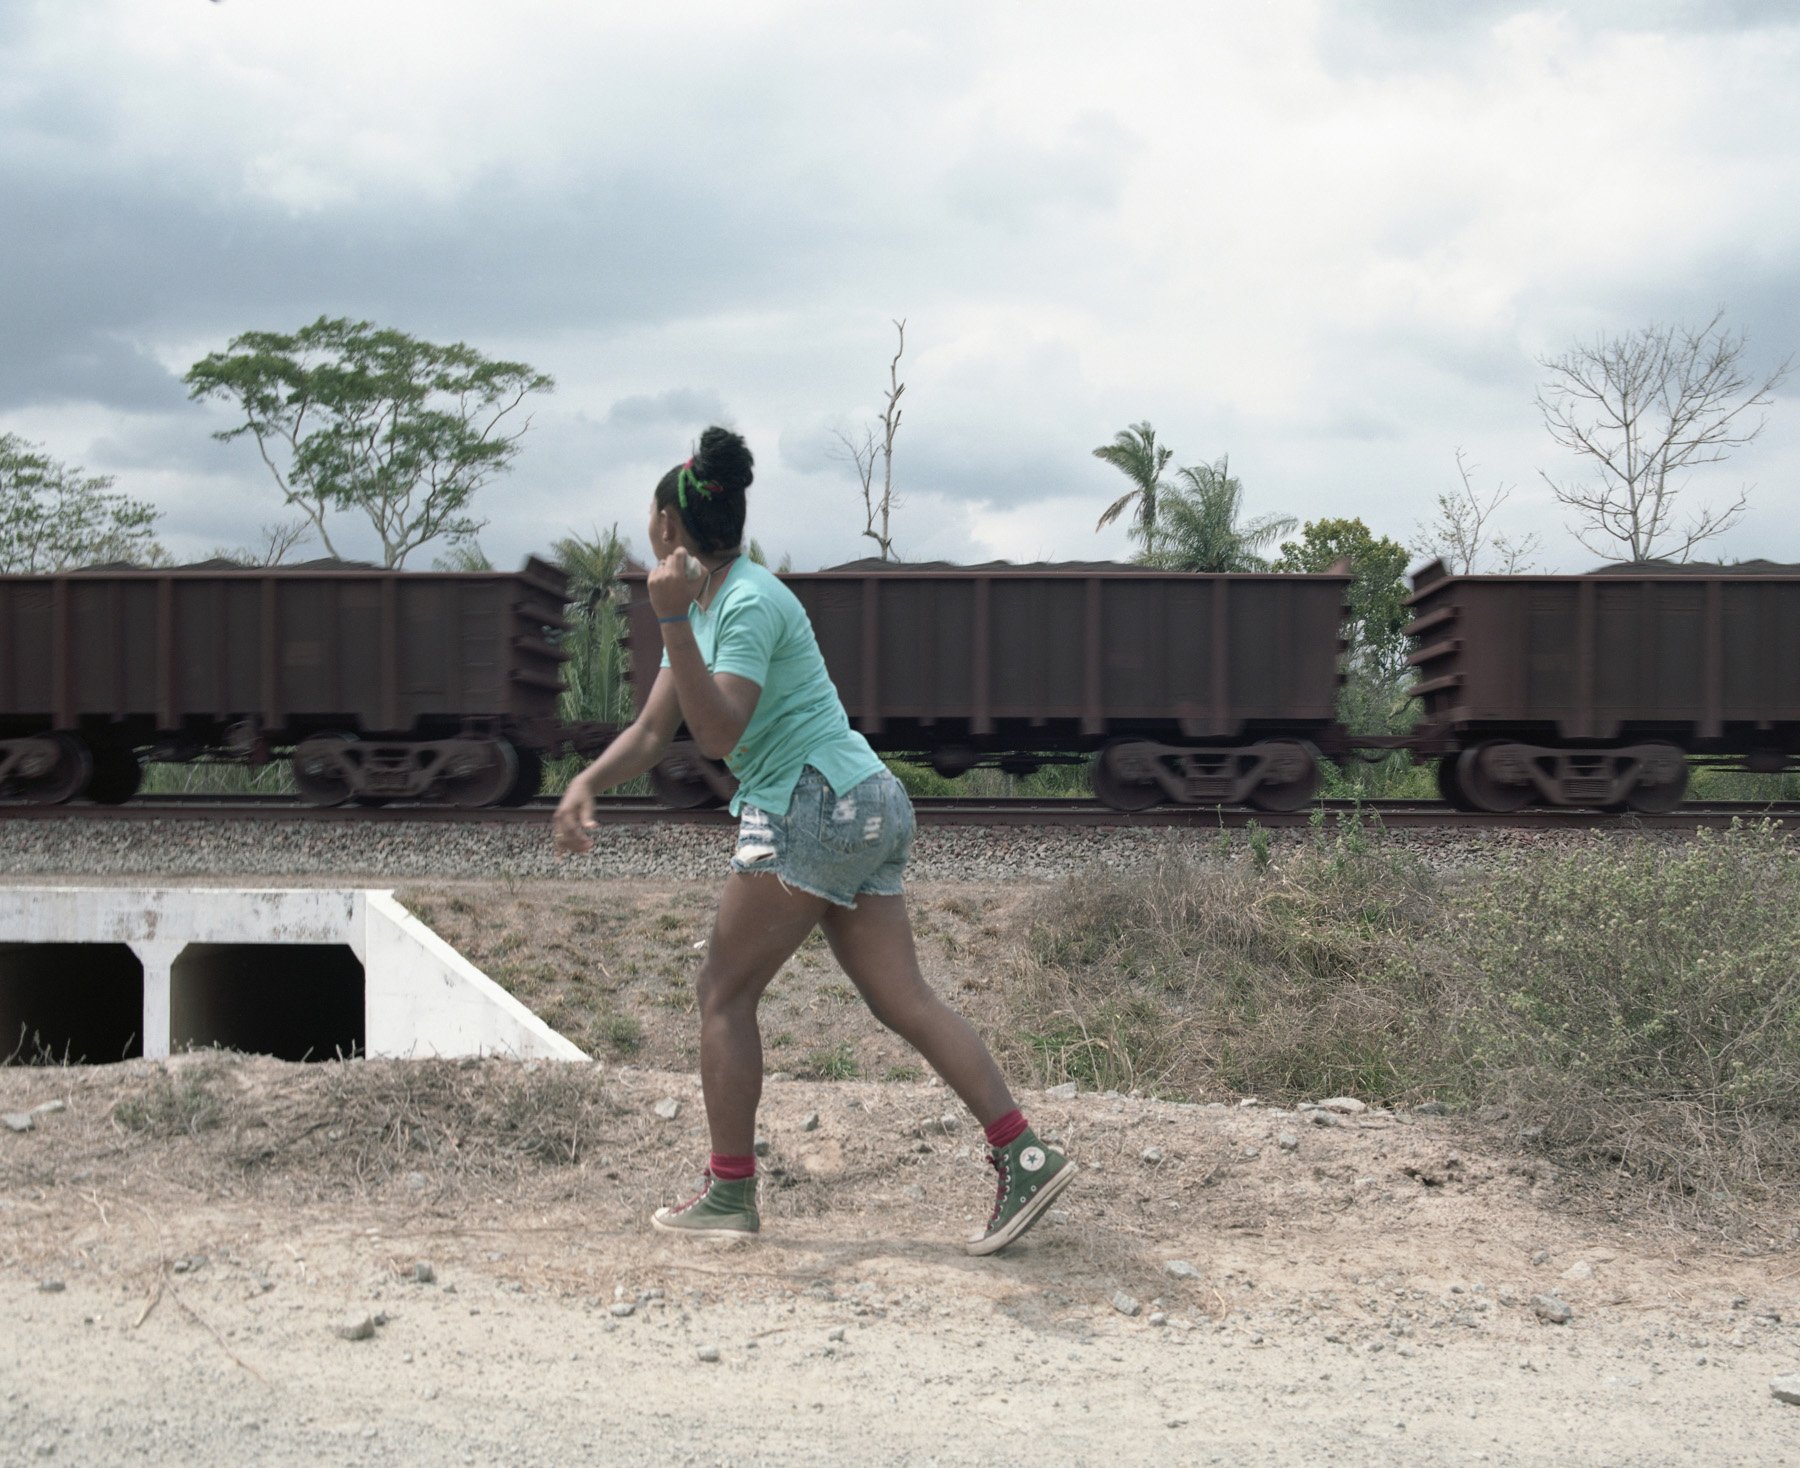  Santa Rosa do Pretos, Maranhão, Brazil, 2017. Josiclea “Zica” Pires throws a rock agains the mining company train that cross the lands of the Quilombo. The construction of the rail dried a water channel used for fishing and irrigation by the people 